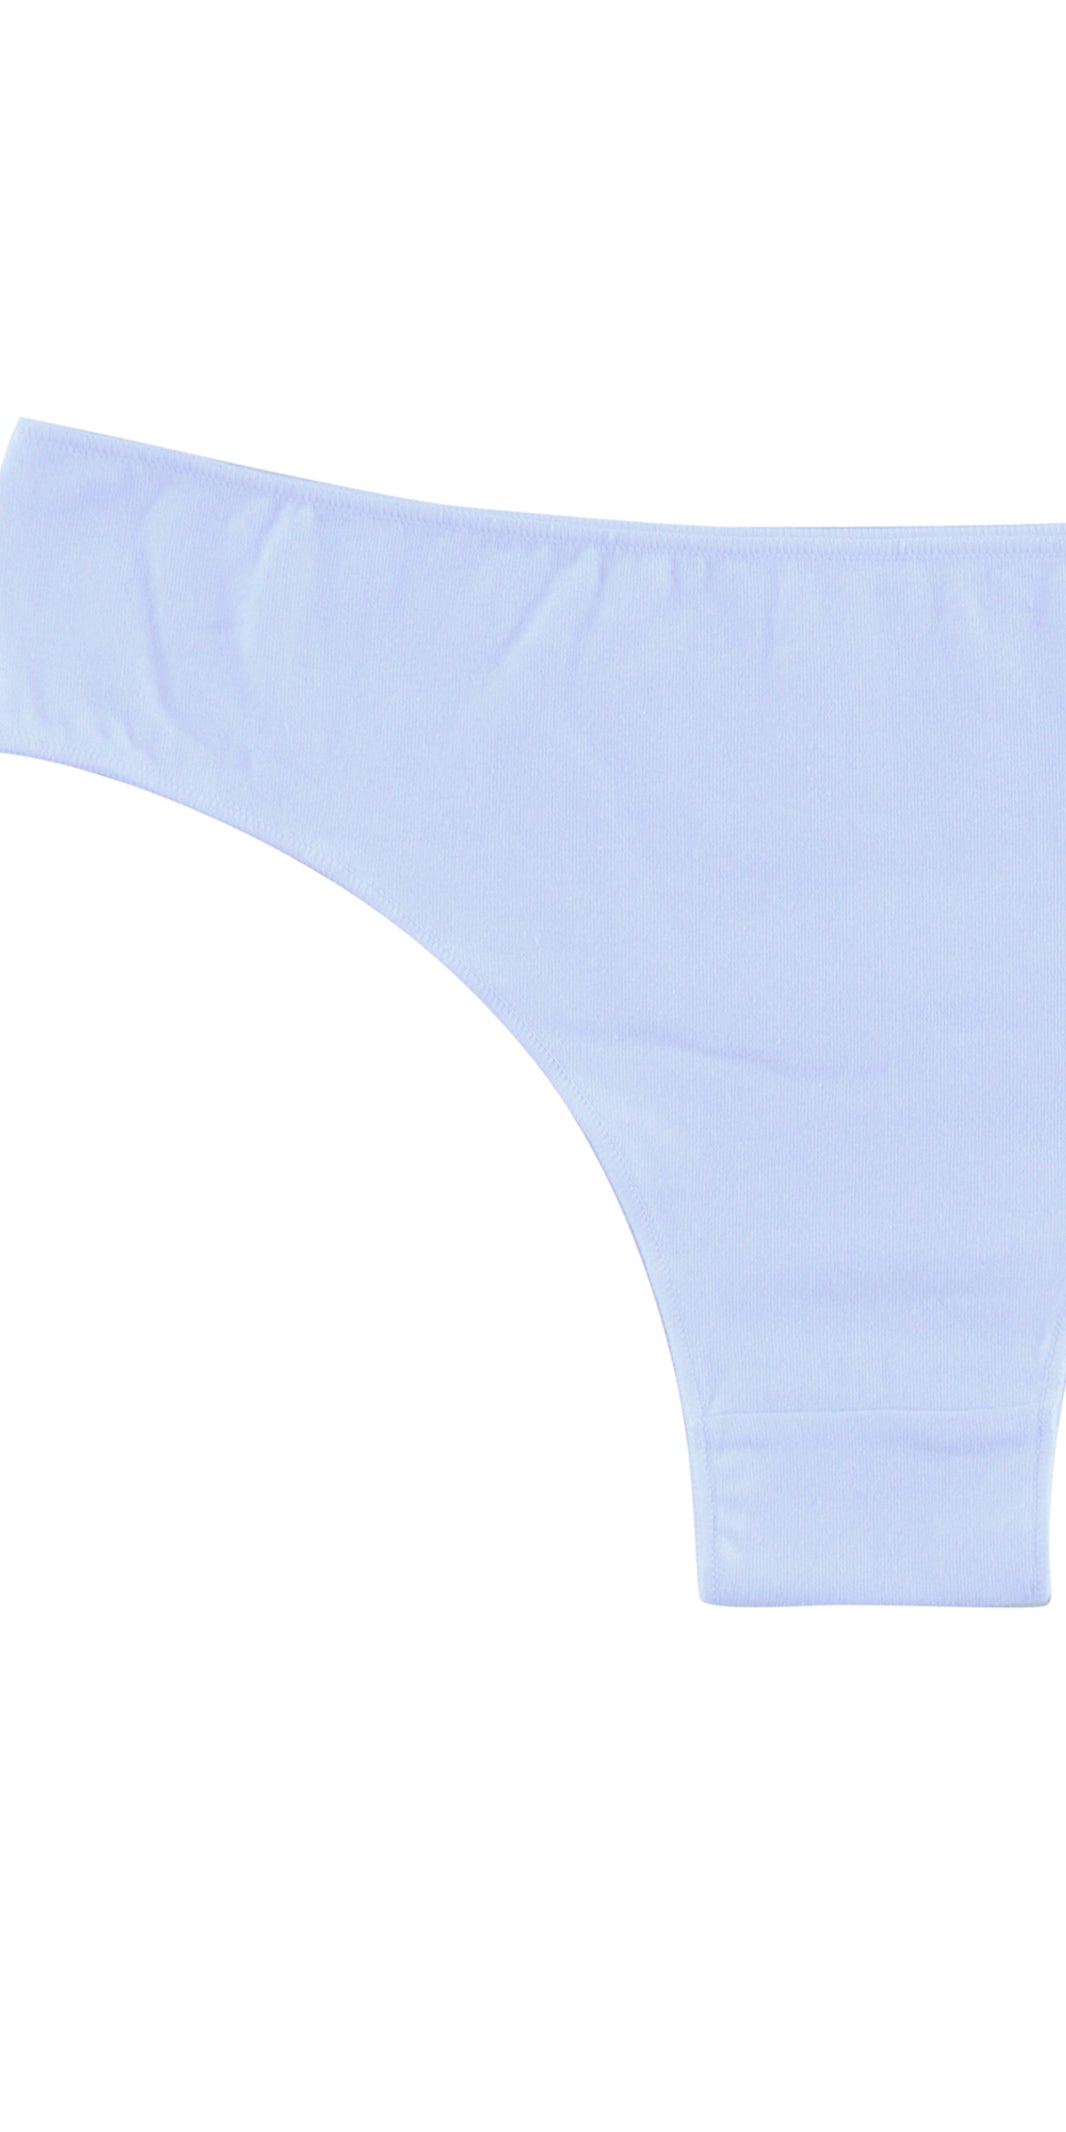 High-quality breathable cotton underwear